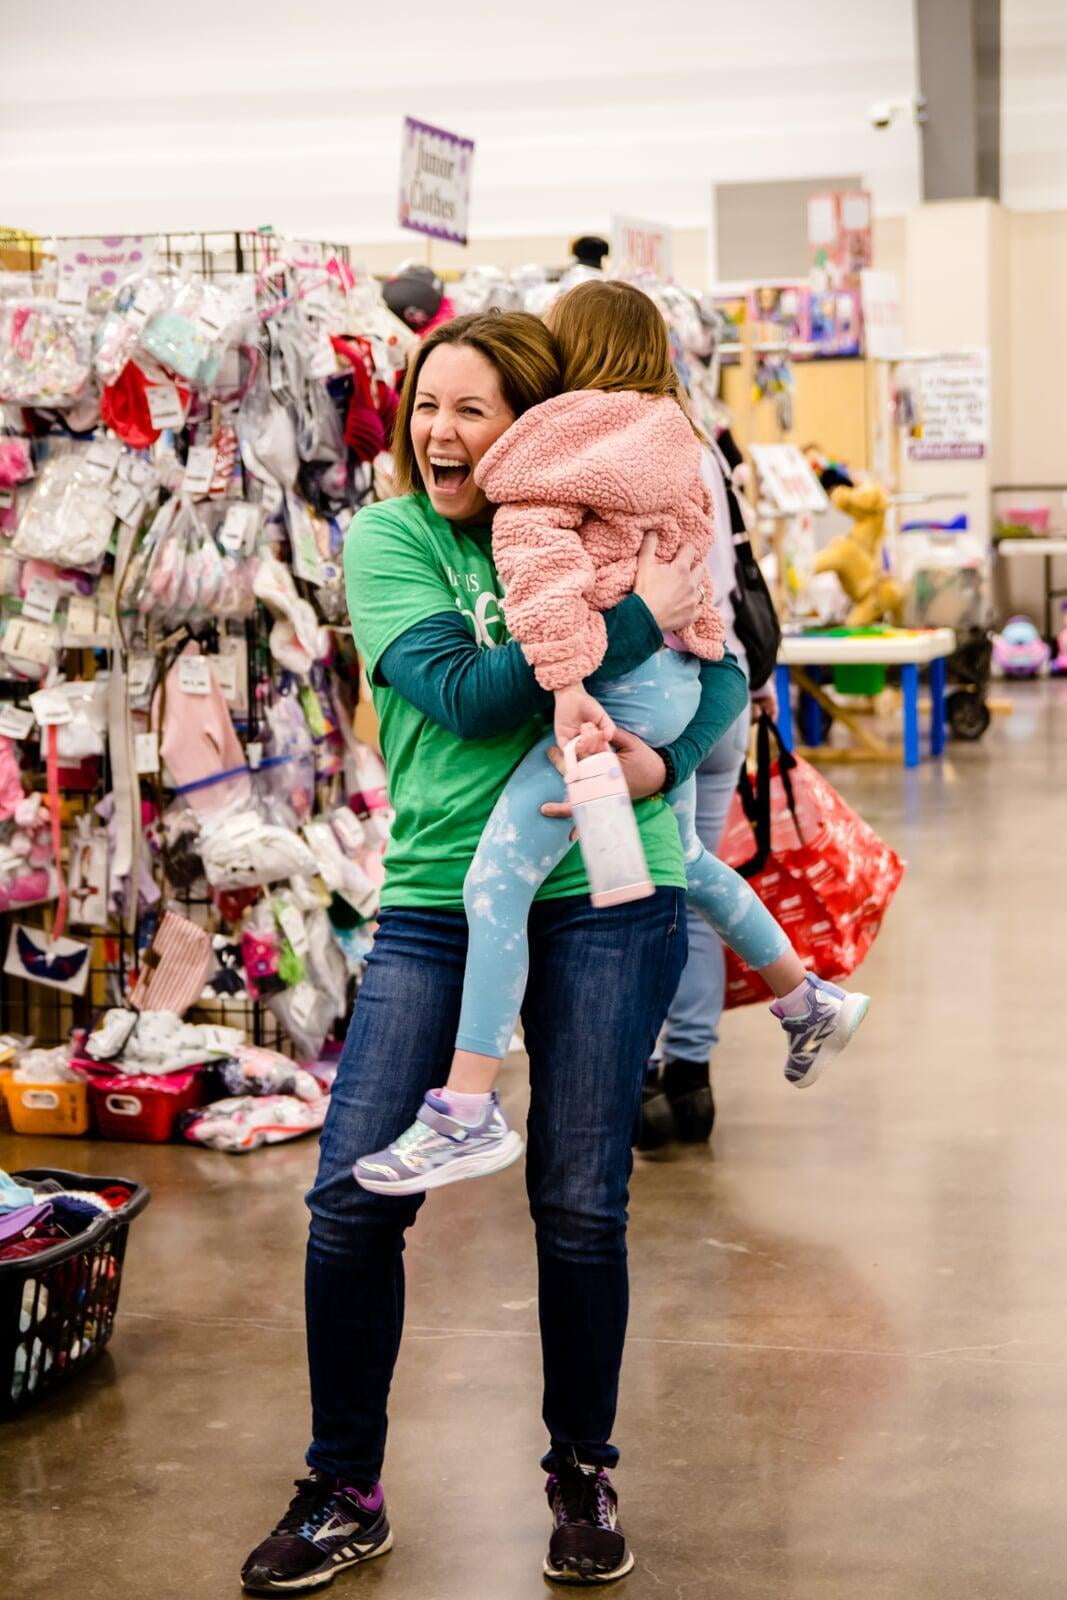 A team member happily hugs a friend's child that was shopping the sale.